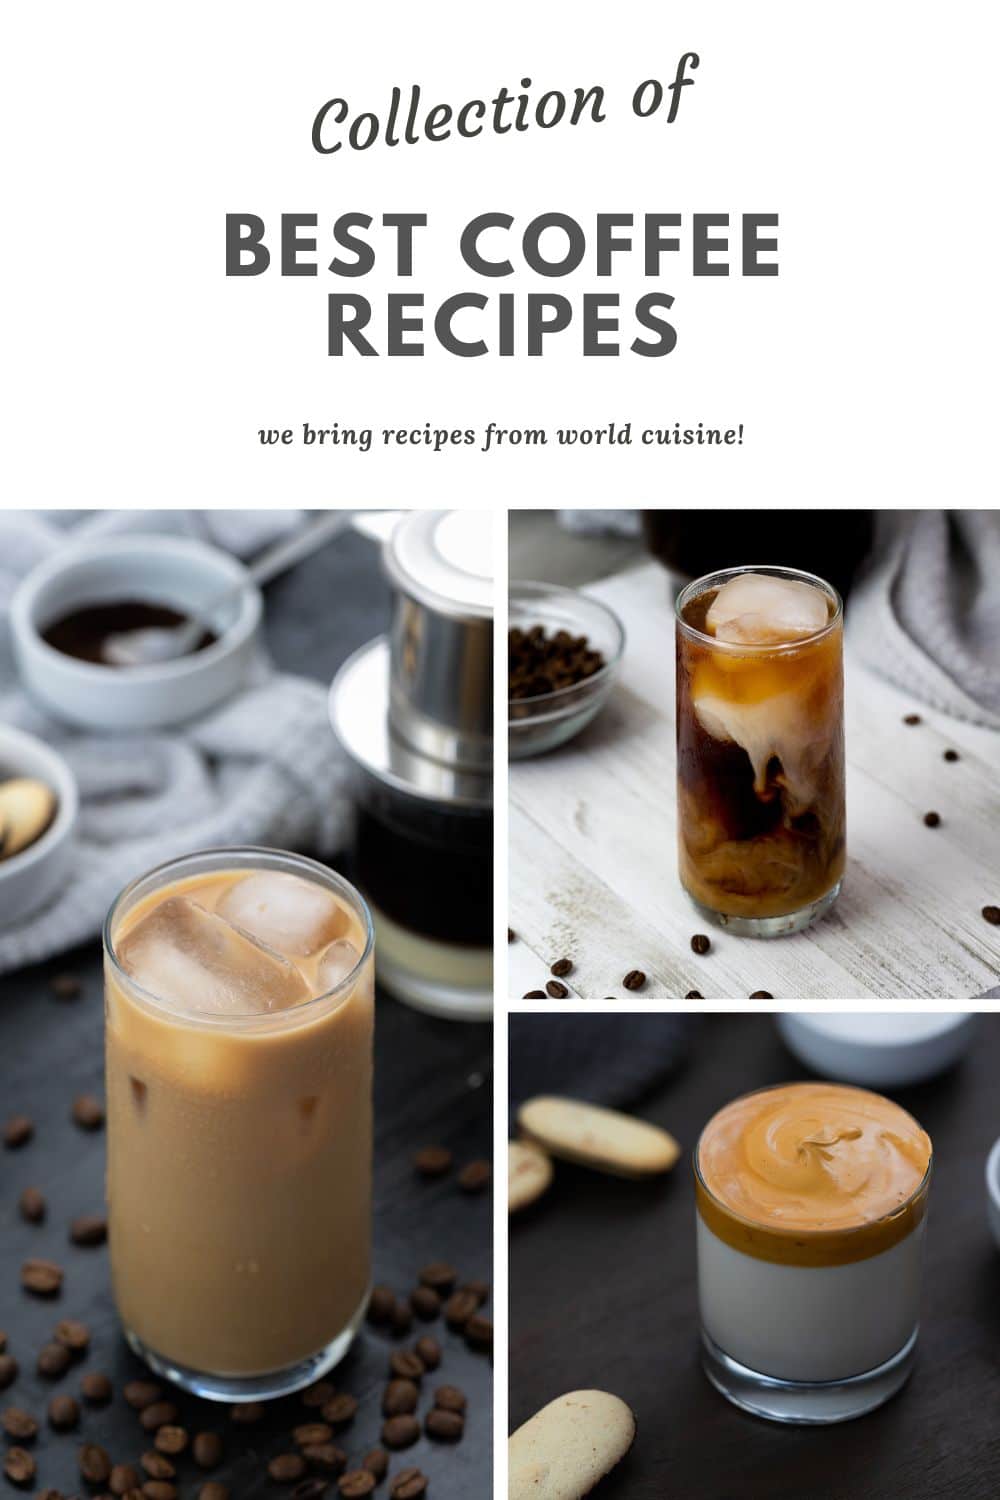 Collect of Coffee Recipes